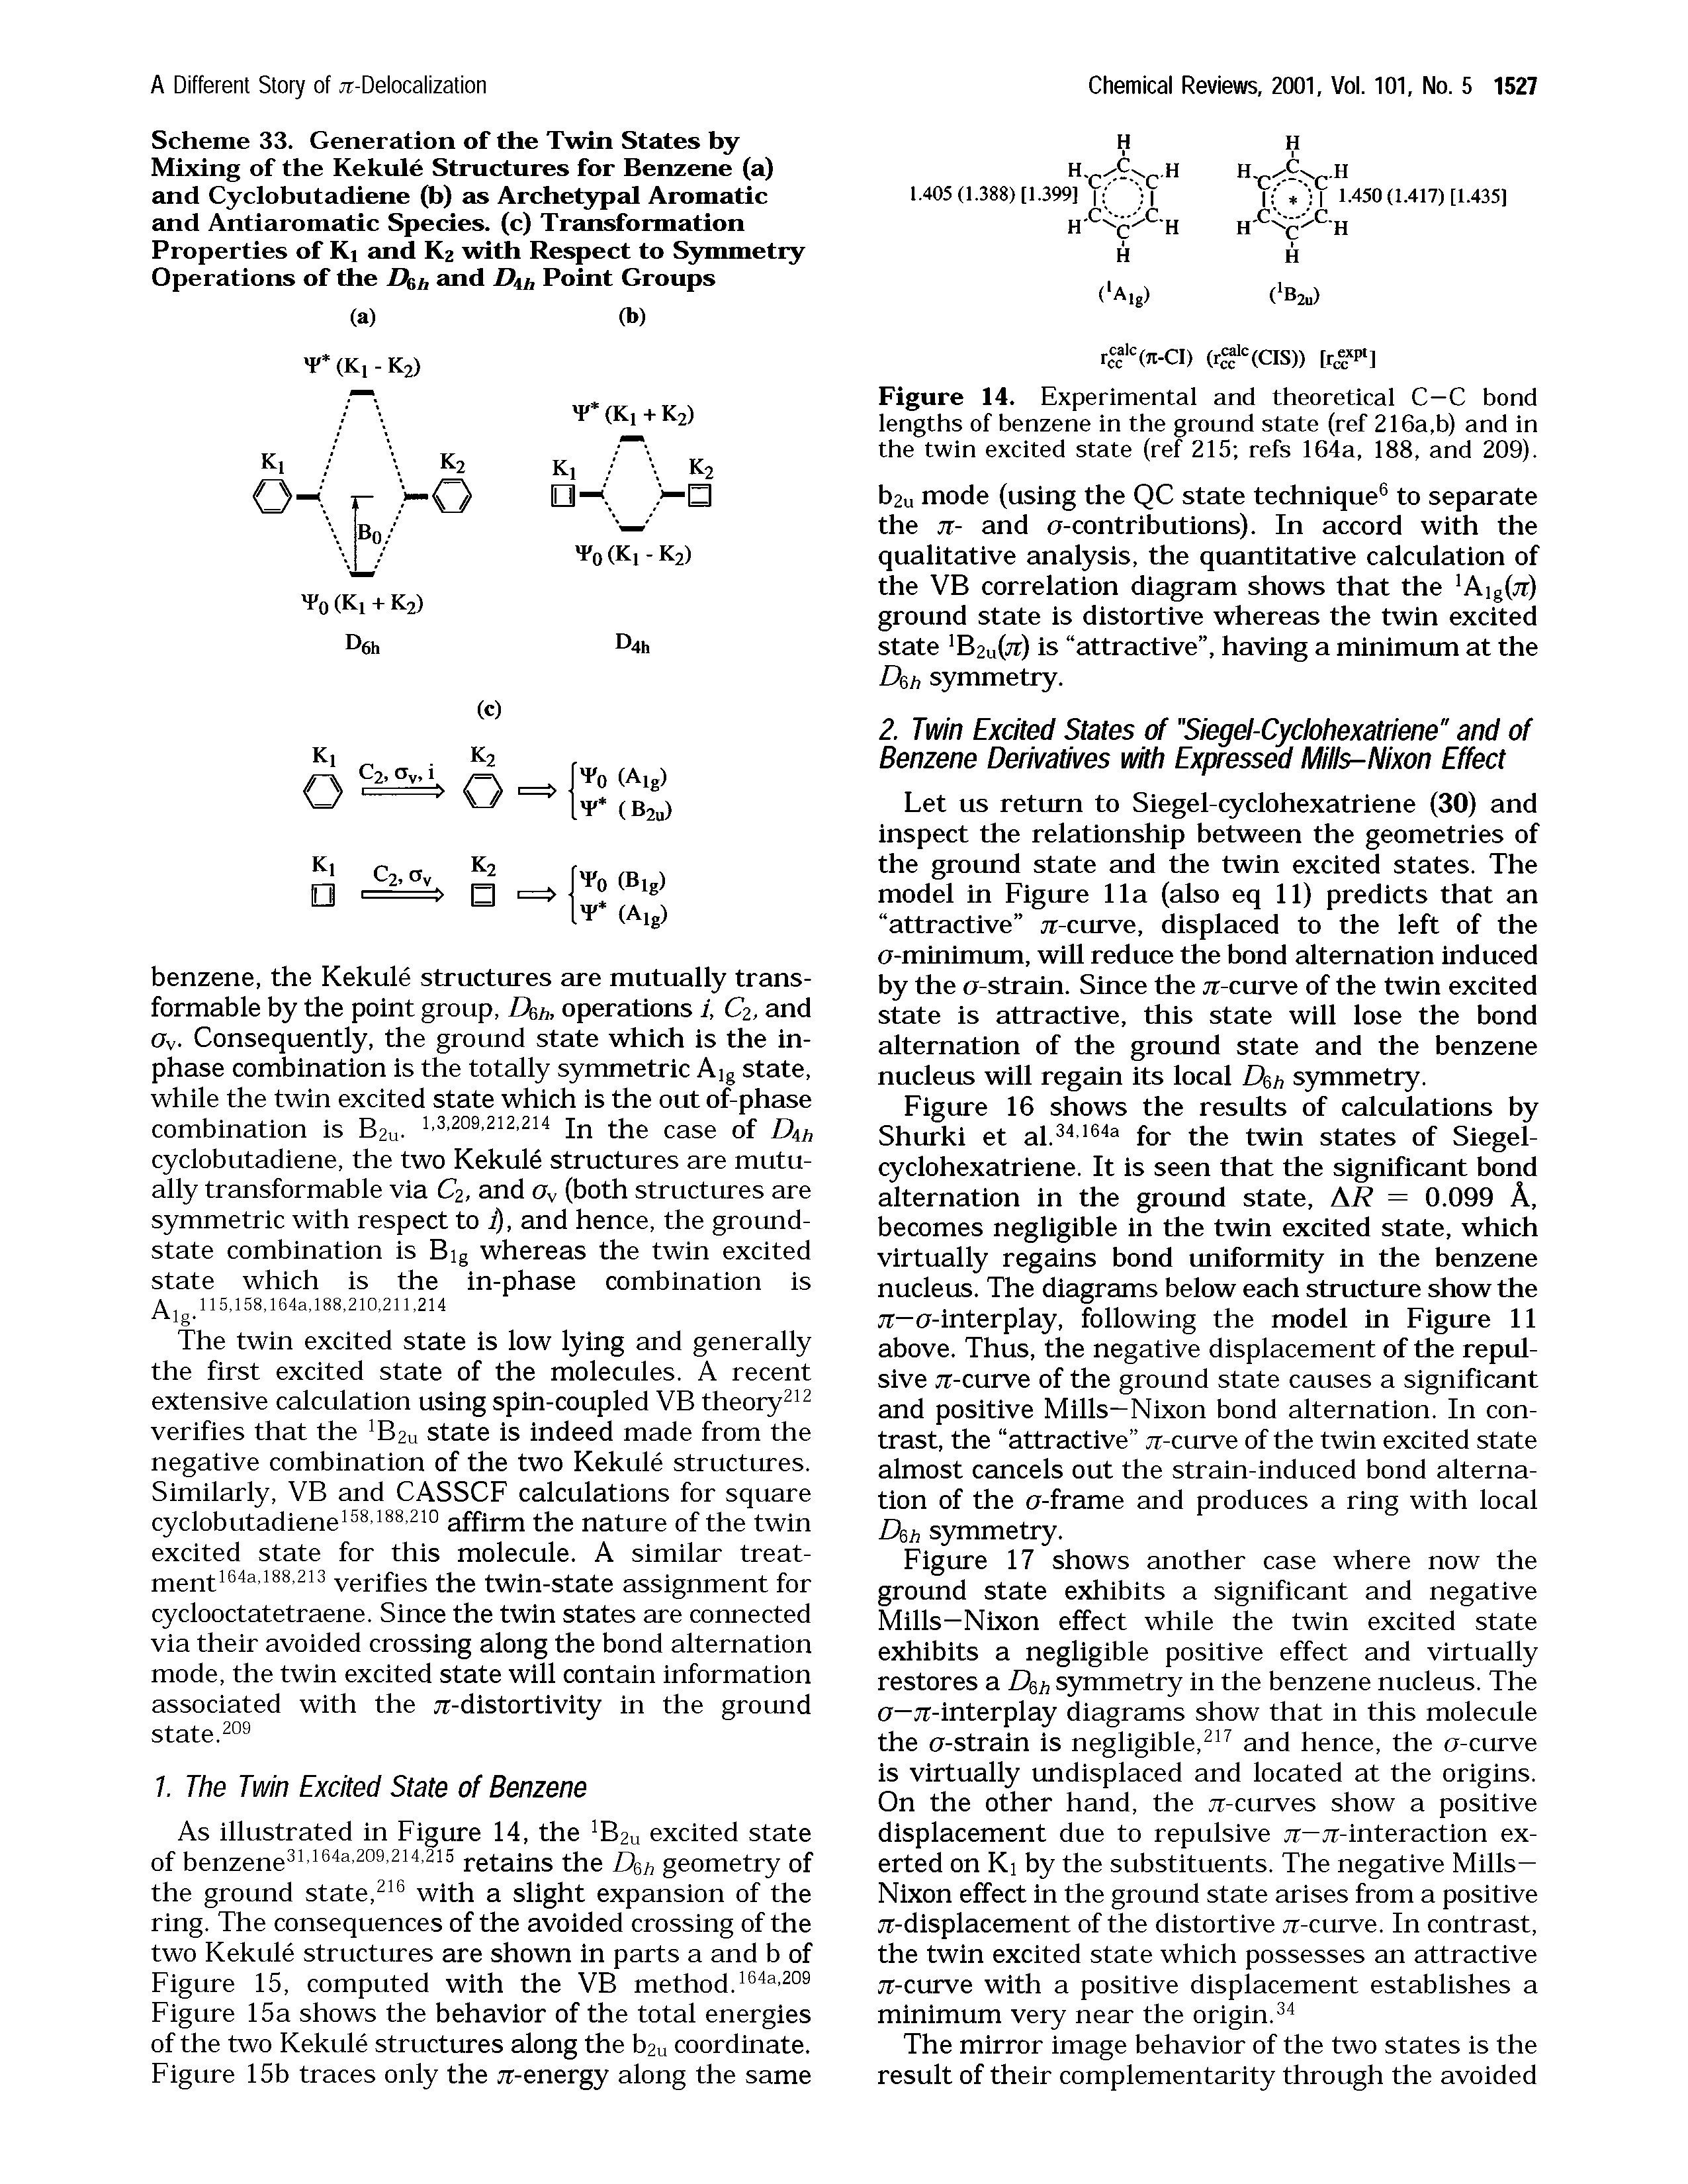 Figure 14. Experimental and theoretical C—C bond lengths of benzene in the ground state (ref 216a,b) and in the twin excited state (ref 215 refs 164a, 188, and 209).